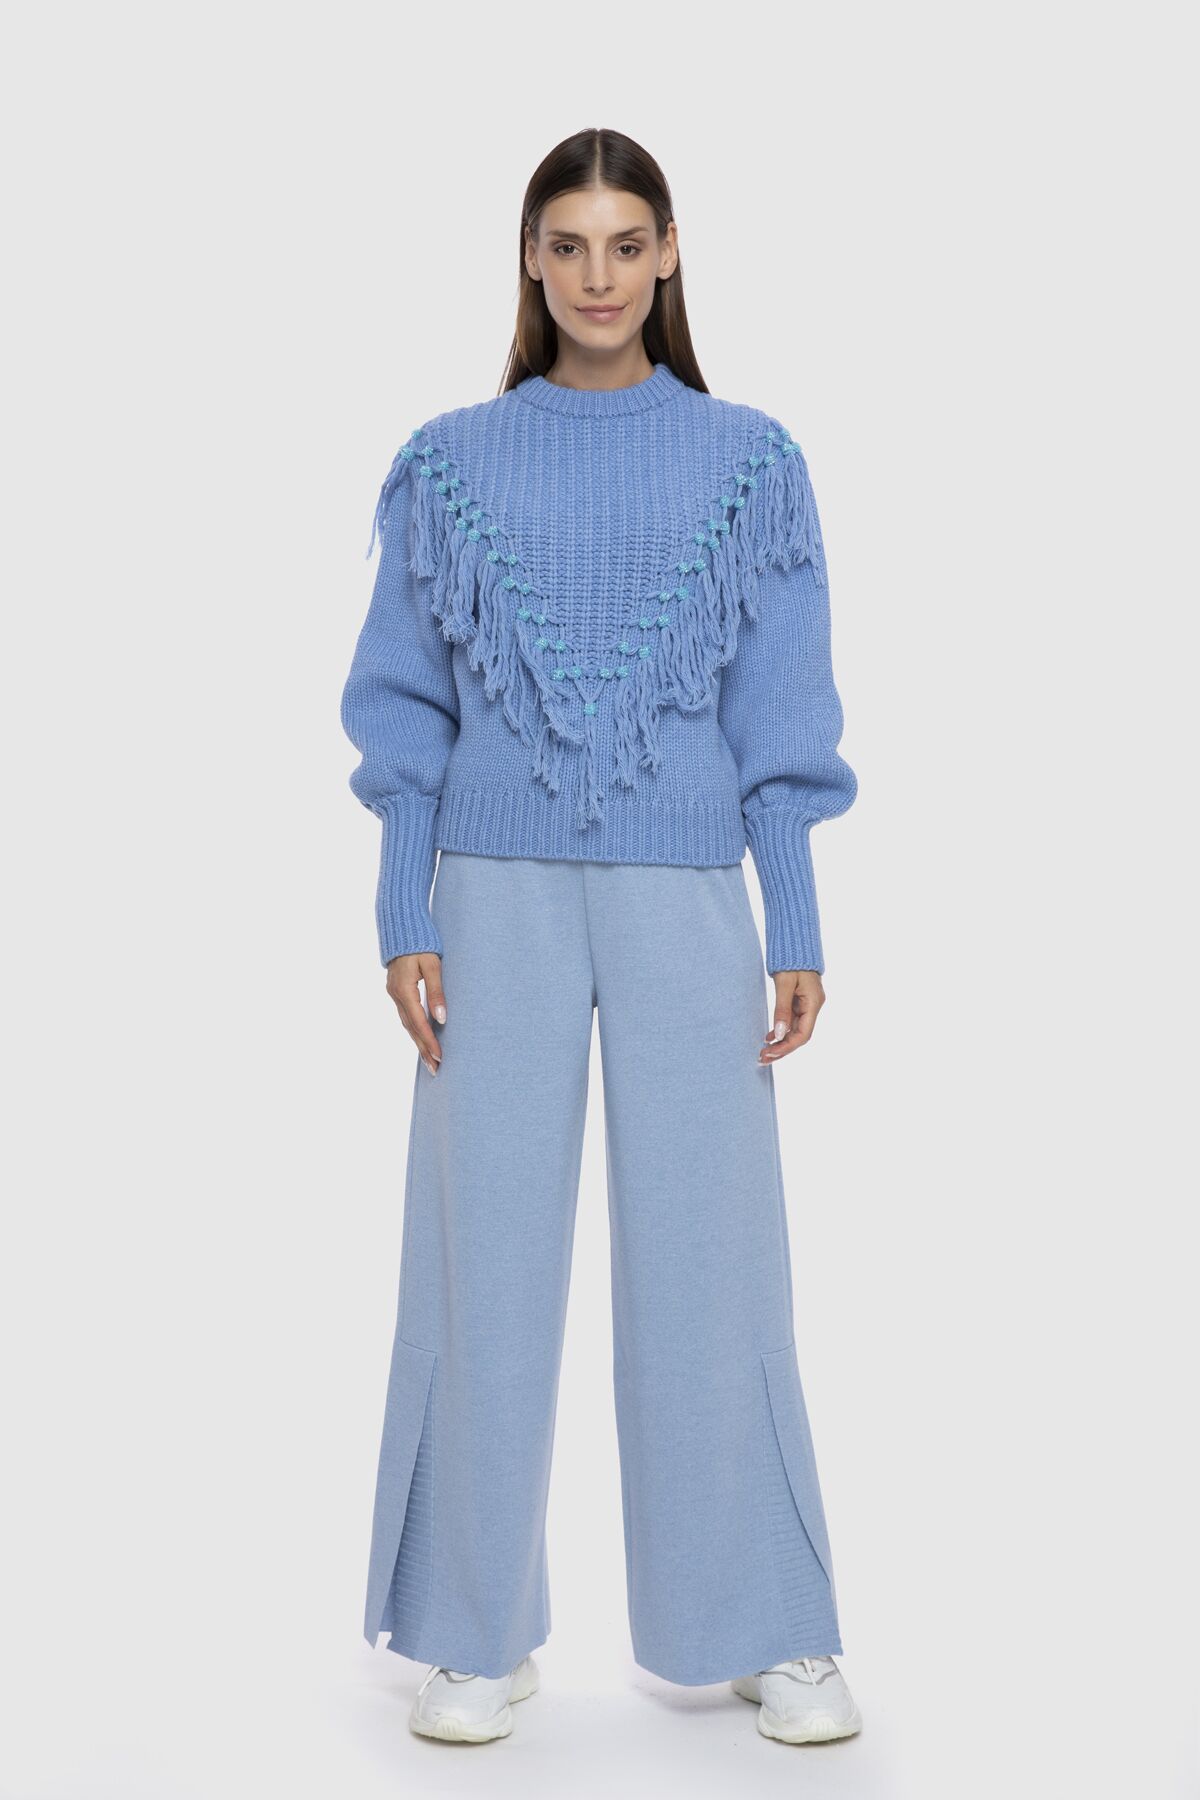  GIZIA - Embroidered And Tassel Detailed Twist Sleeve Stand Collar Blue Sweater